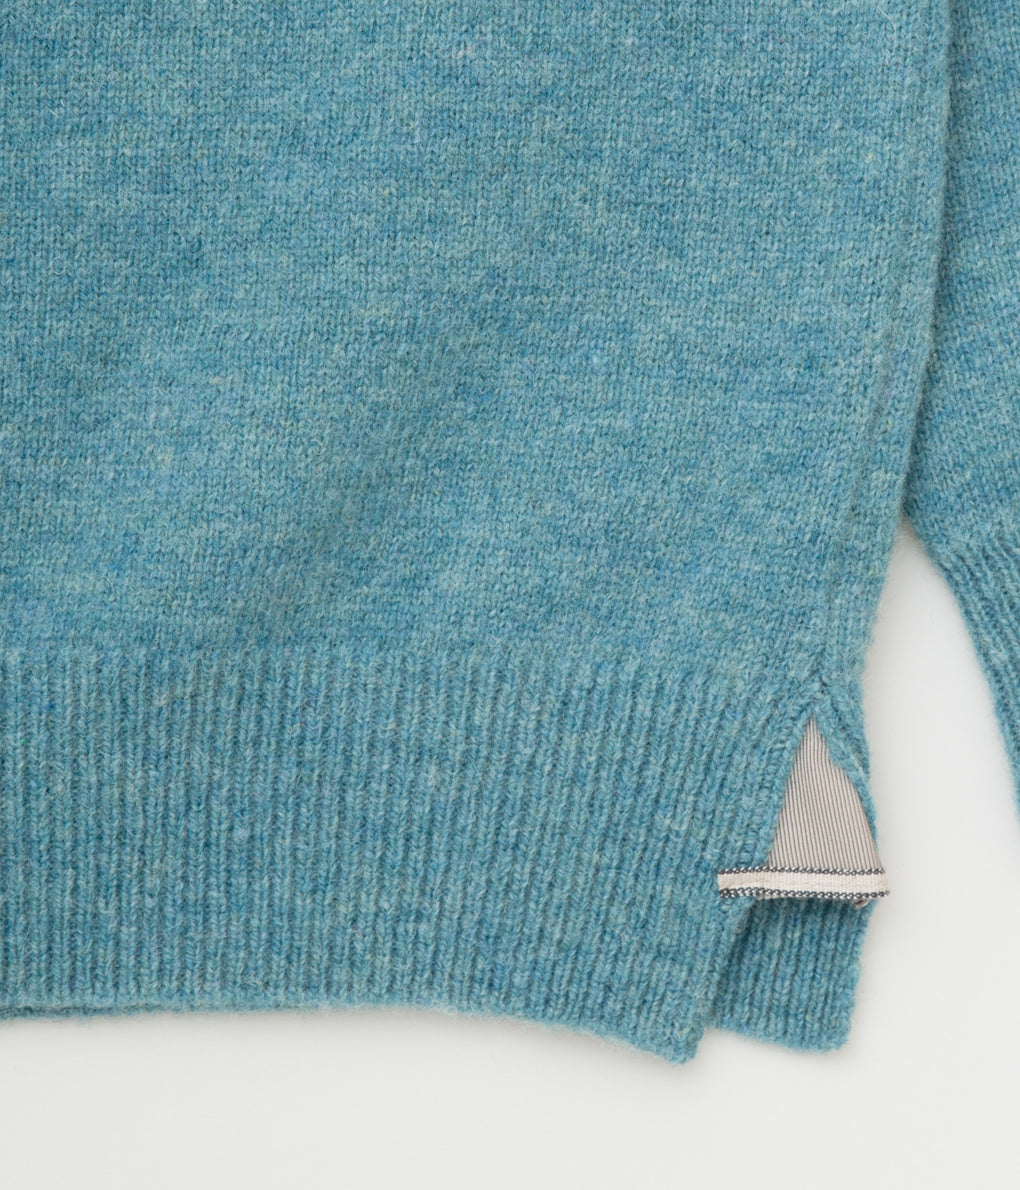 ANSNAM "CREWNECK KNIT with PATCH" (OASIS)